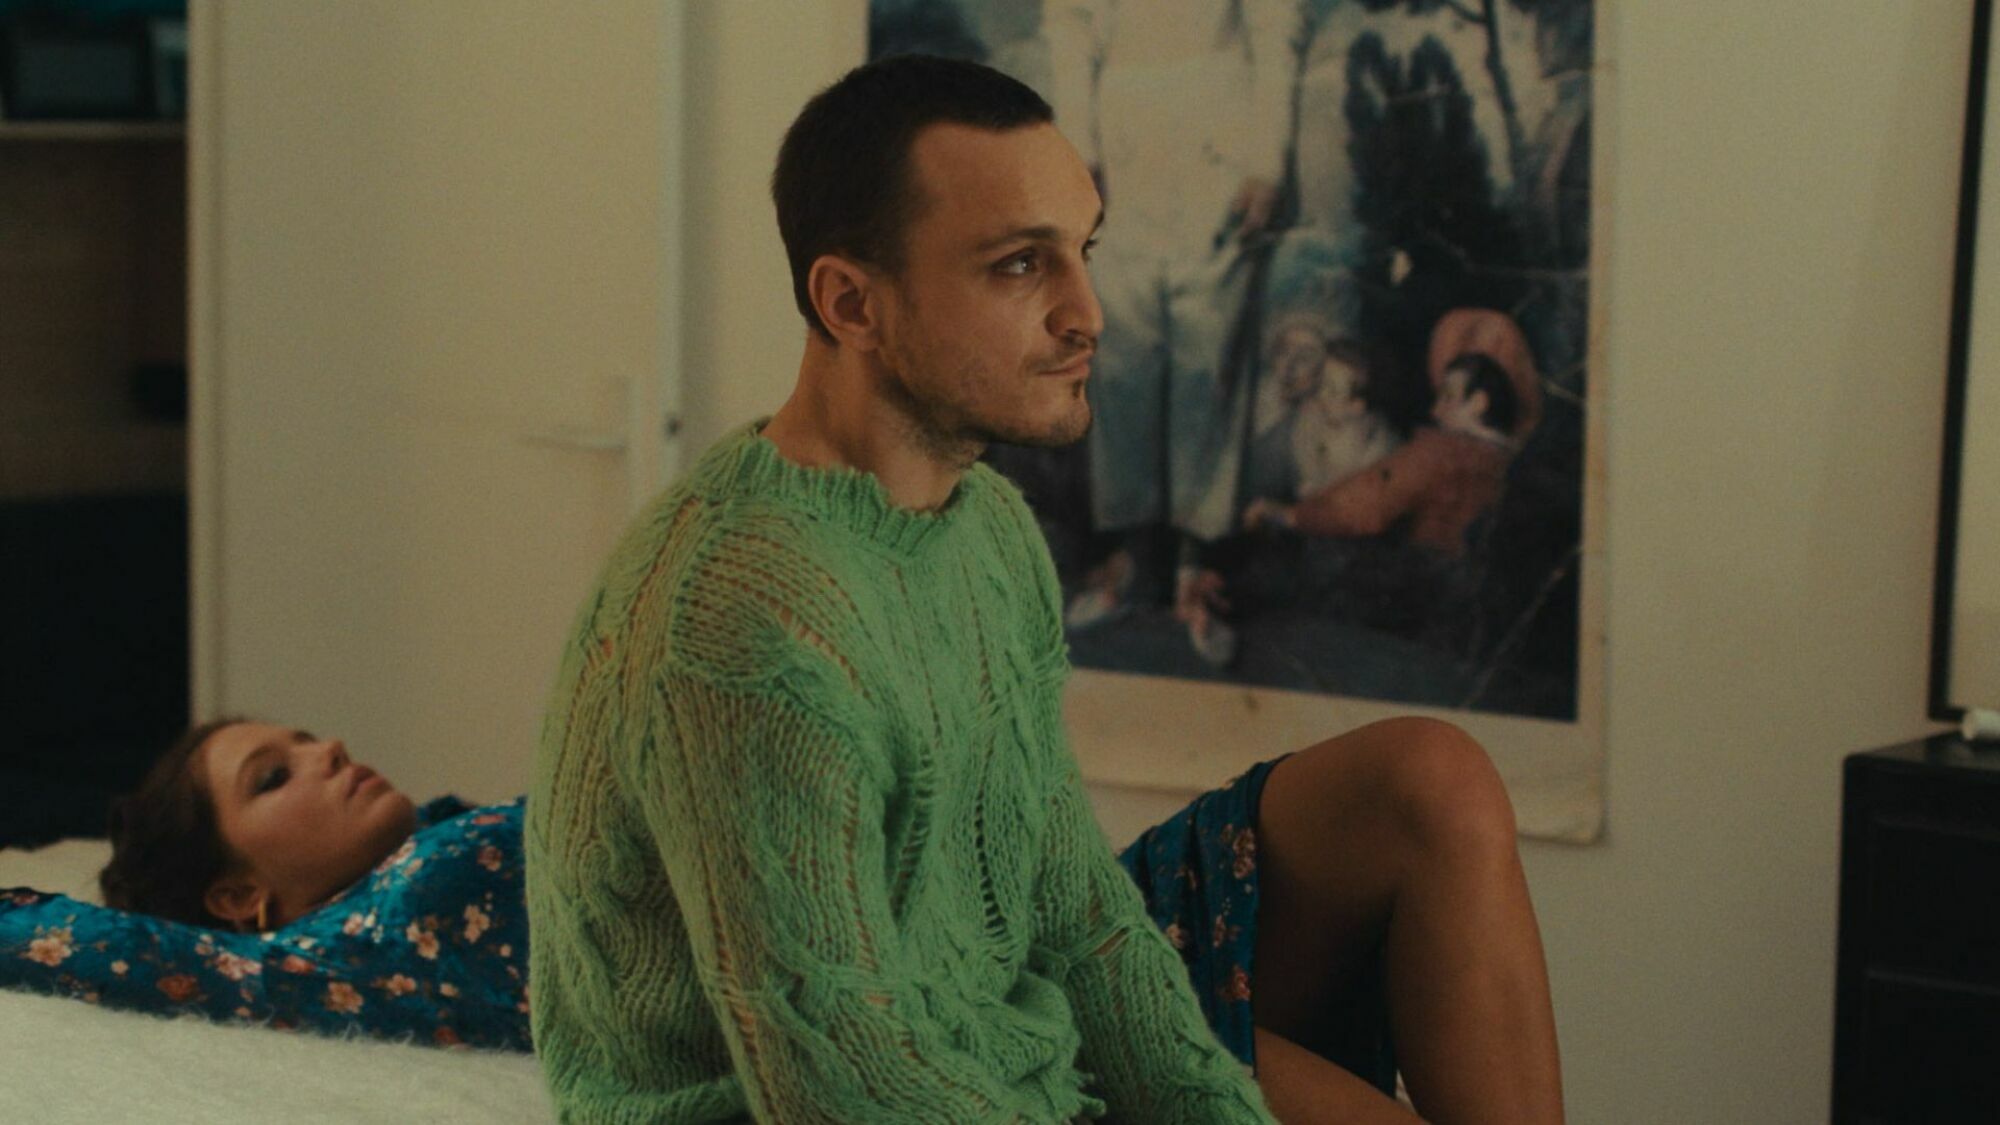 A man wearing a green sweater sits on a bed with a woman lying beside him. 